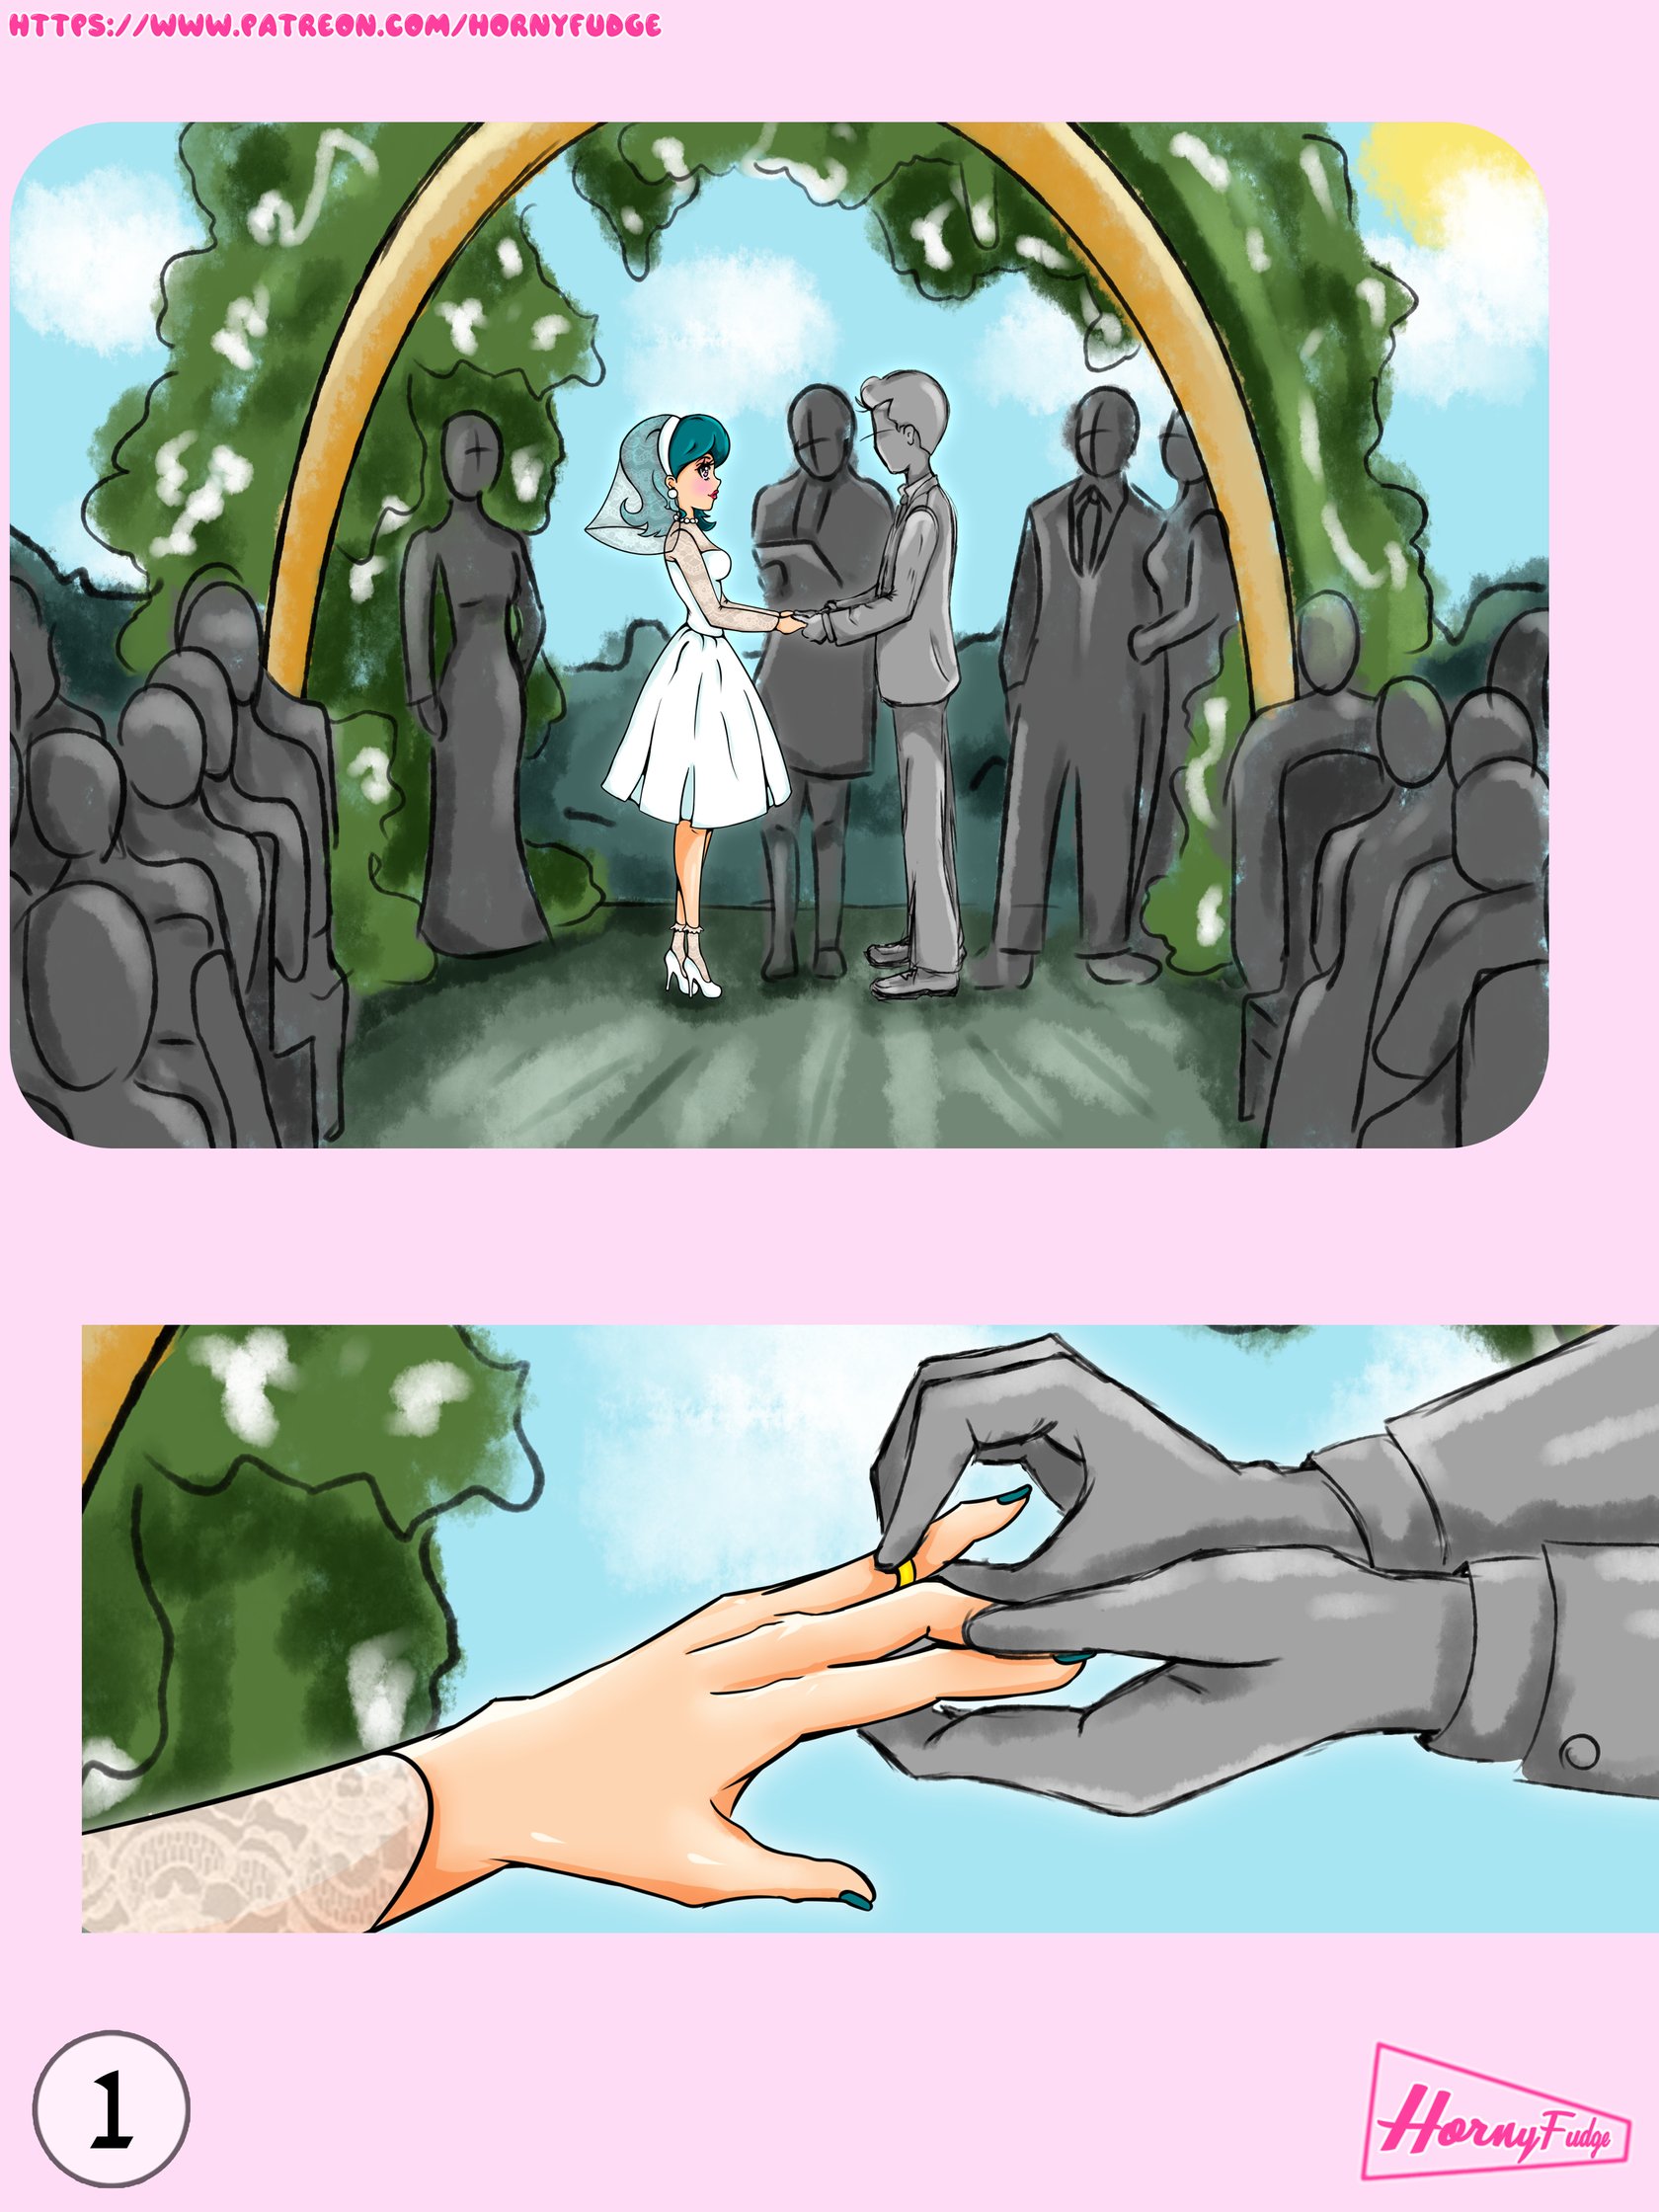 Stepford wife wedding Complete comics (8 pages) comic porn Immagine